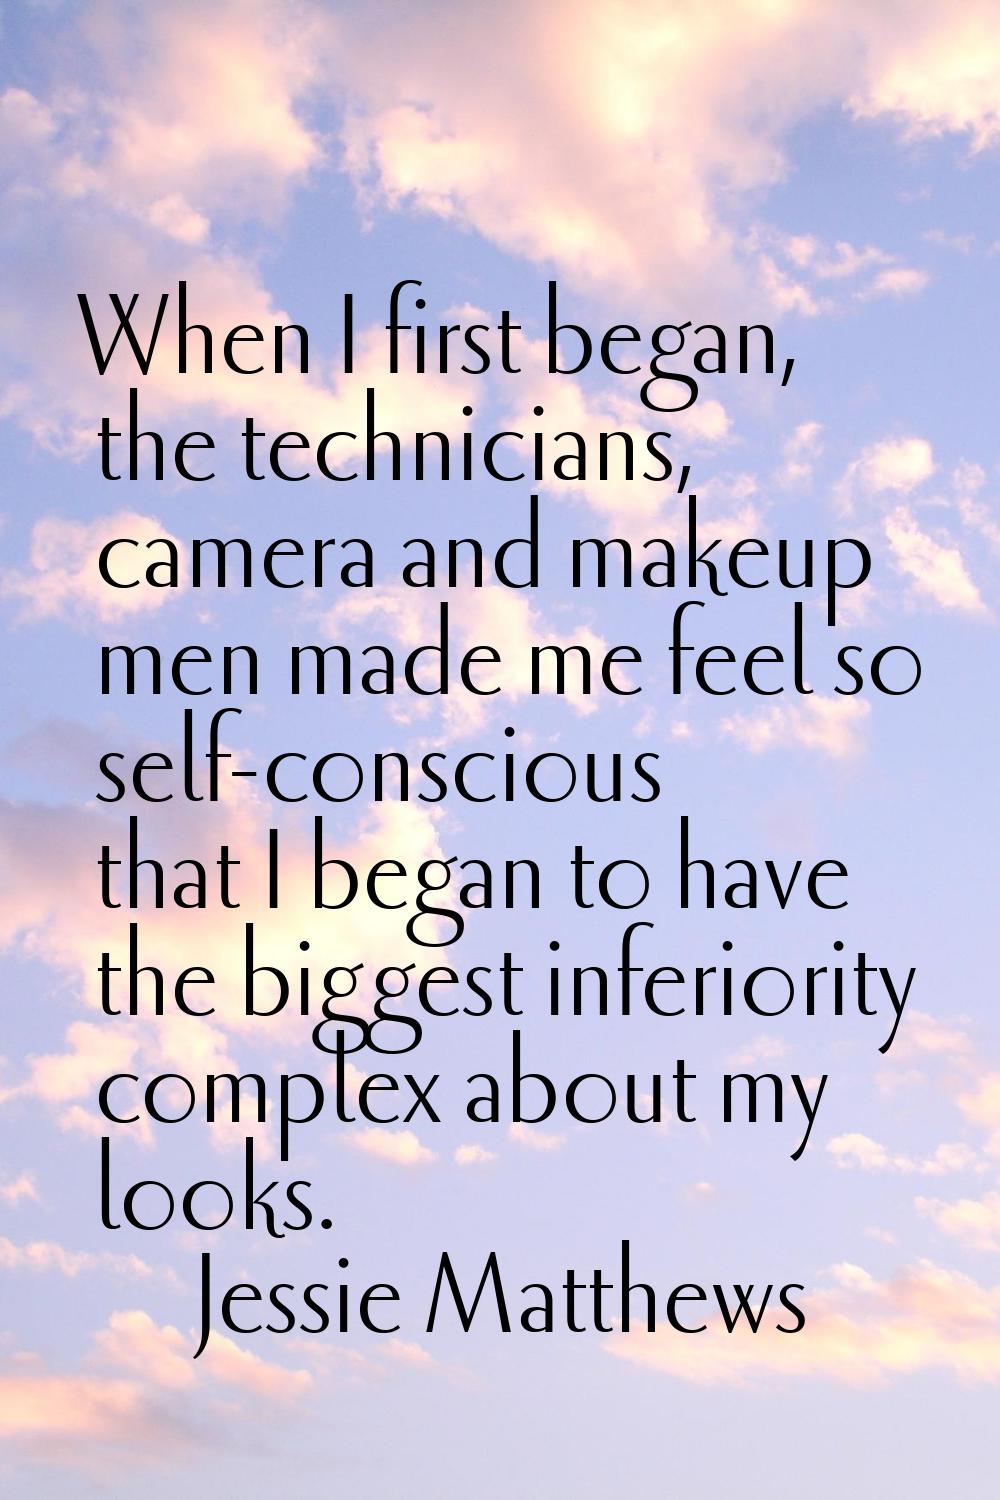 When I first began, the technicians, camera and makeup men made me feel so self-conscious that I be